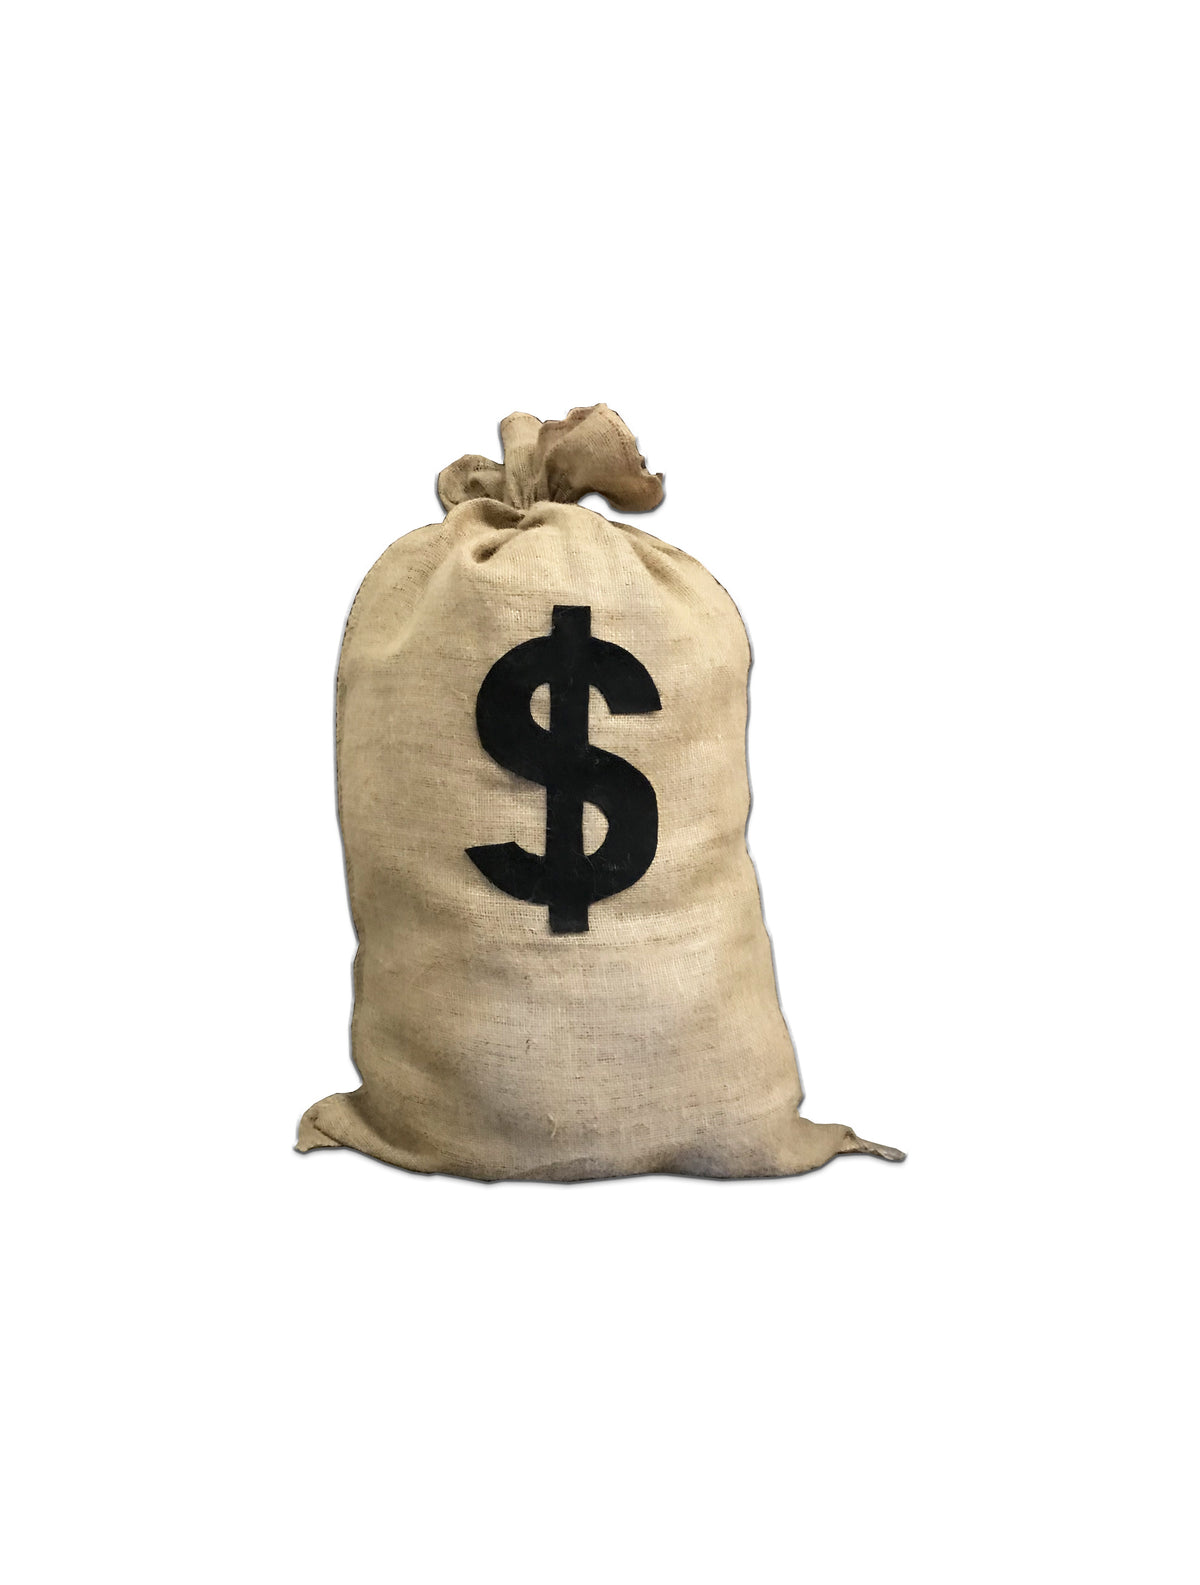 bag with money